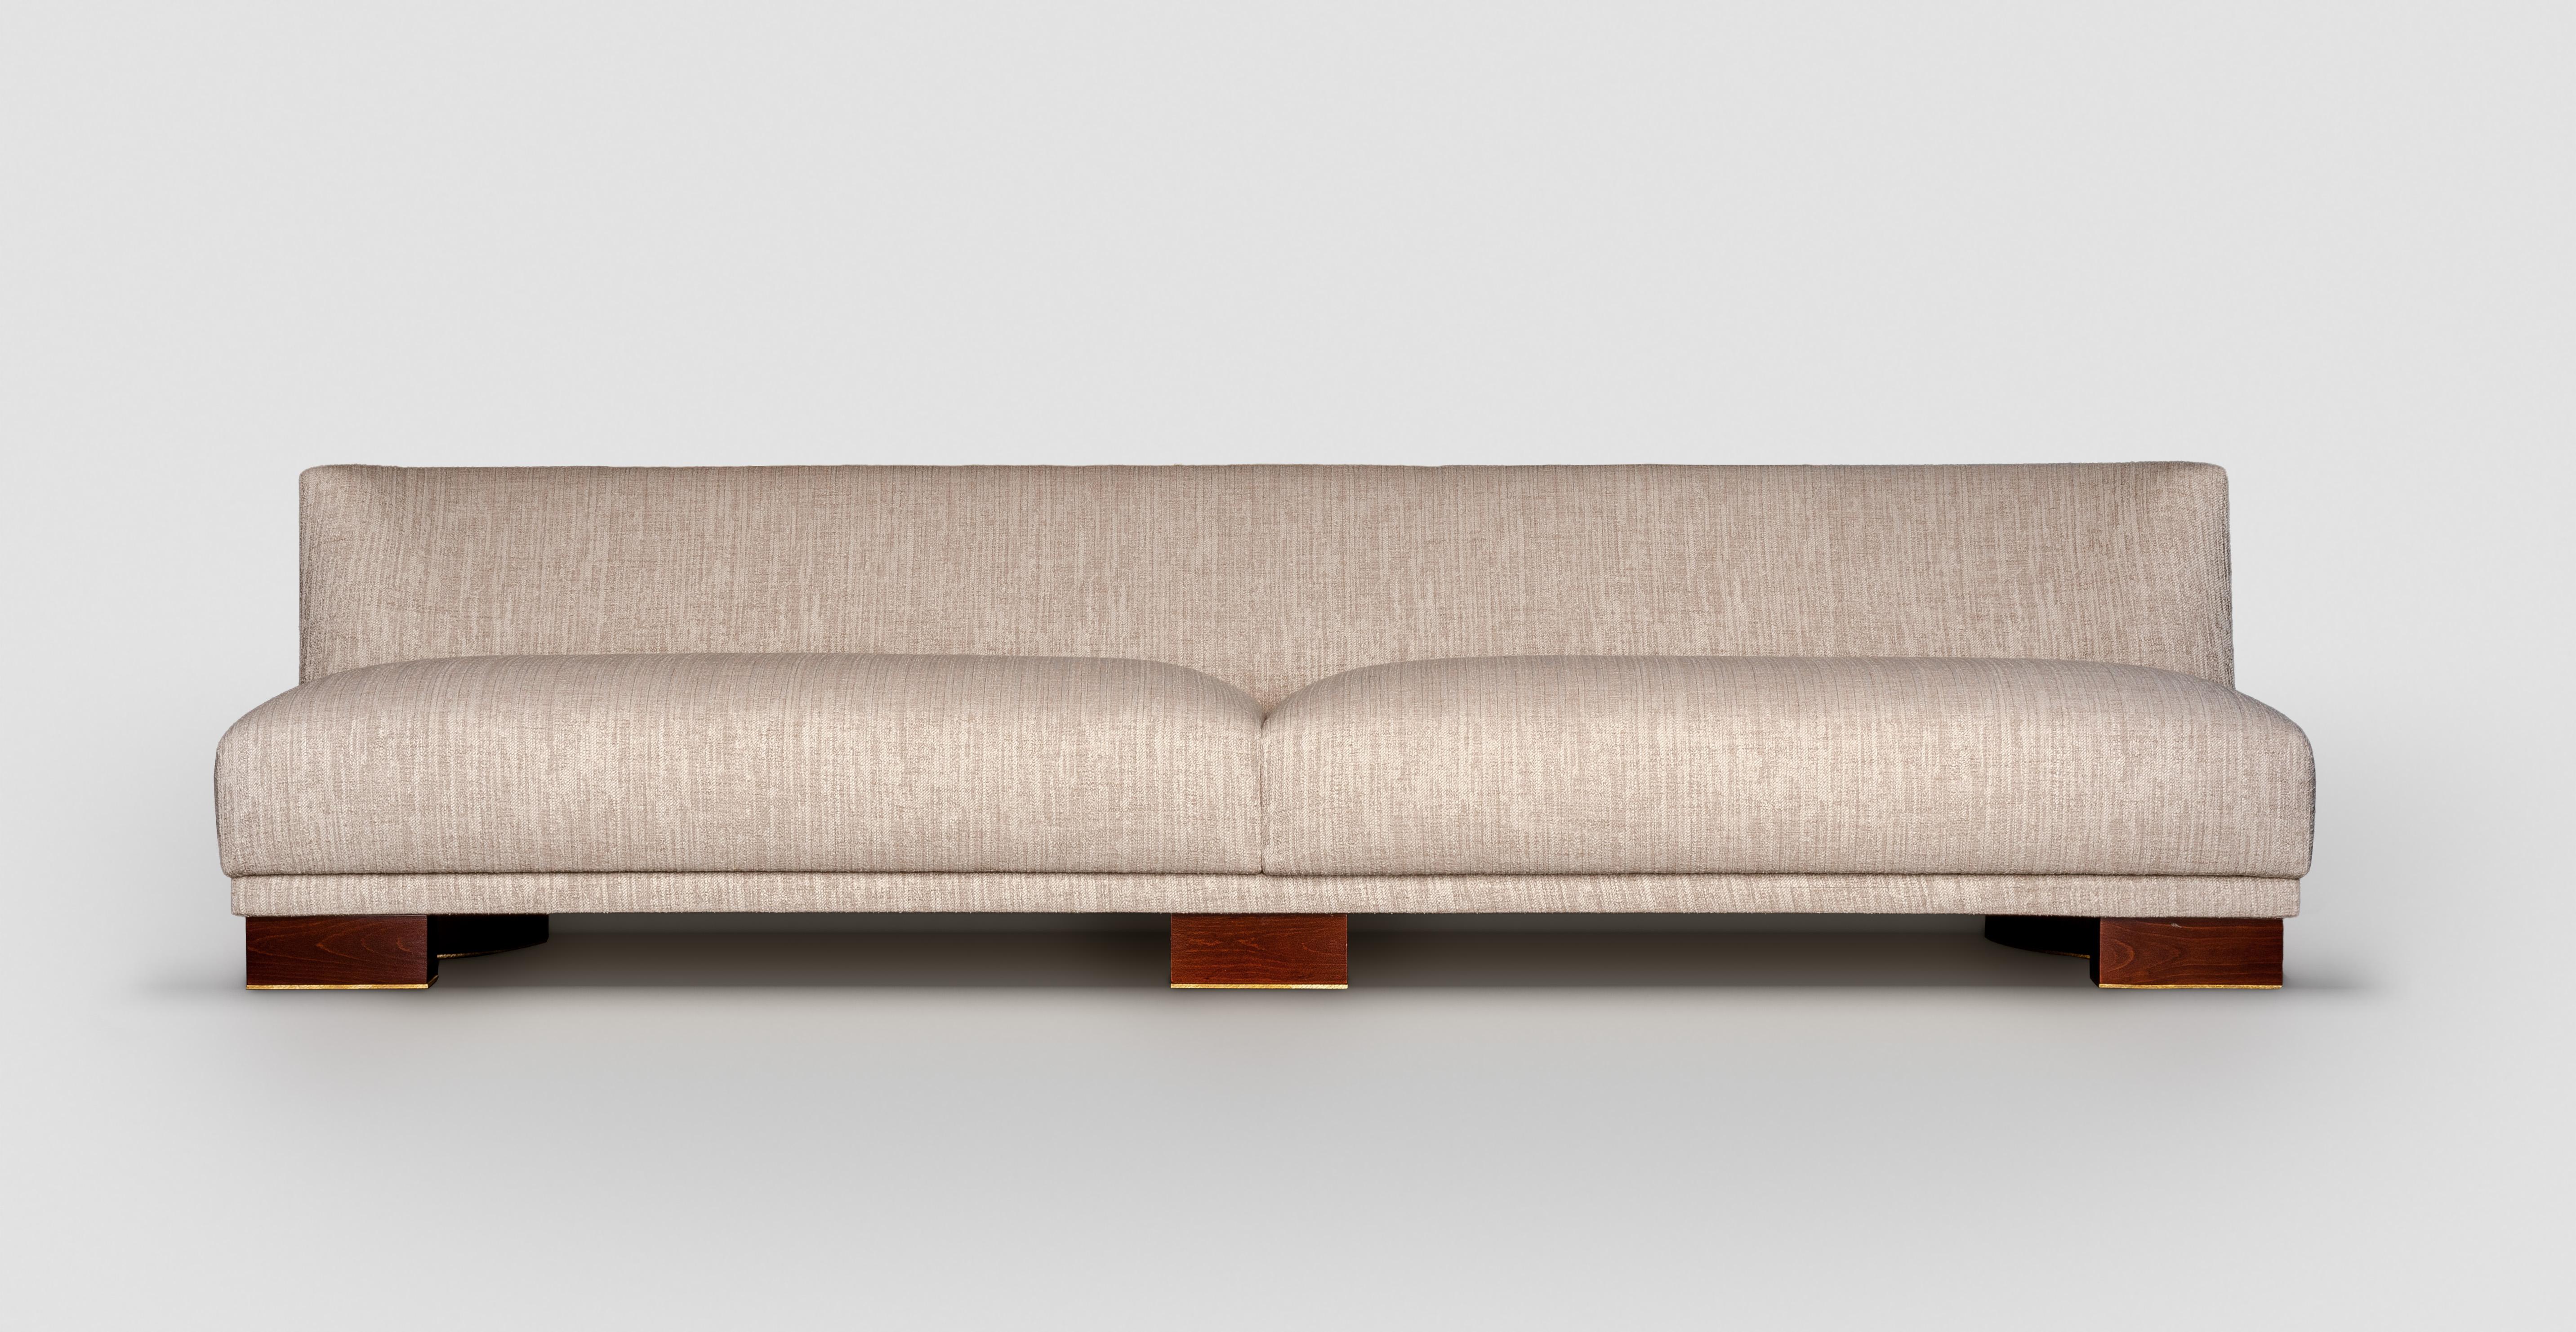 Achille Salvagni
Alcyone
2019
Upholstered sofa with a gentle sweeping curved side, made of a polished walnut wood structure and polished 24-carat gold-plated hand-engraved brass details.  The base offers a discrete flash of bronze and lacquer.  Sold